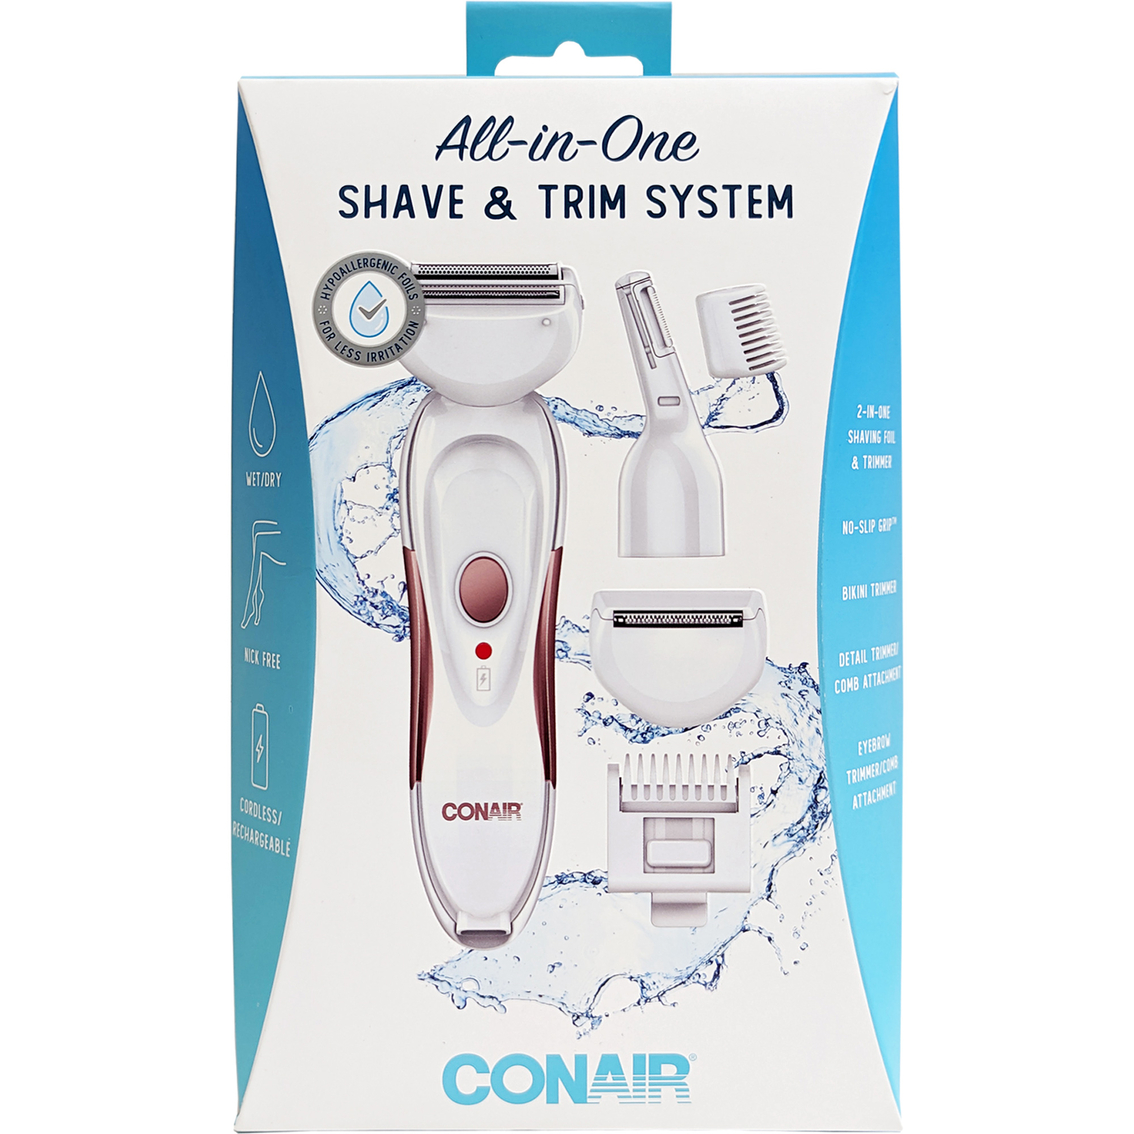 Conair All in One Shave and Trim Cordless and Rechargeable System - Image 9 of 10